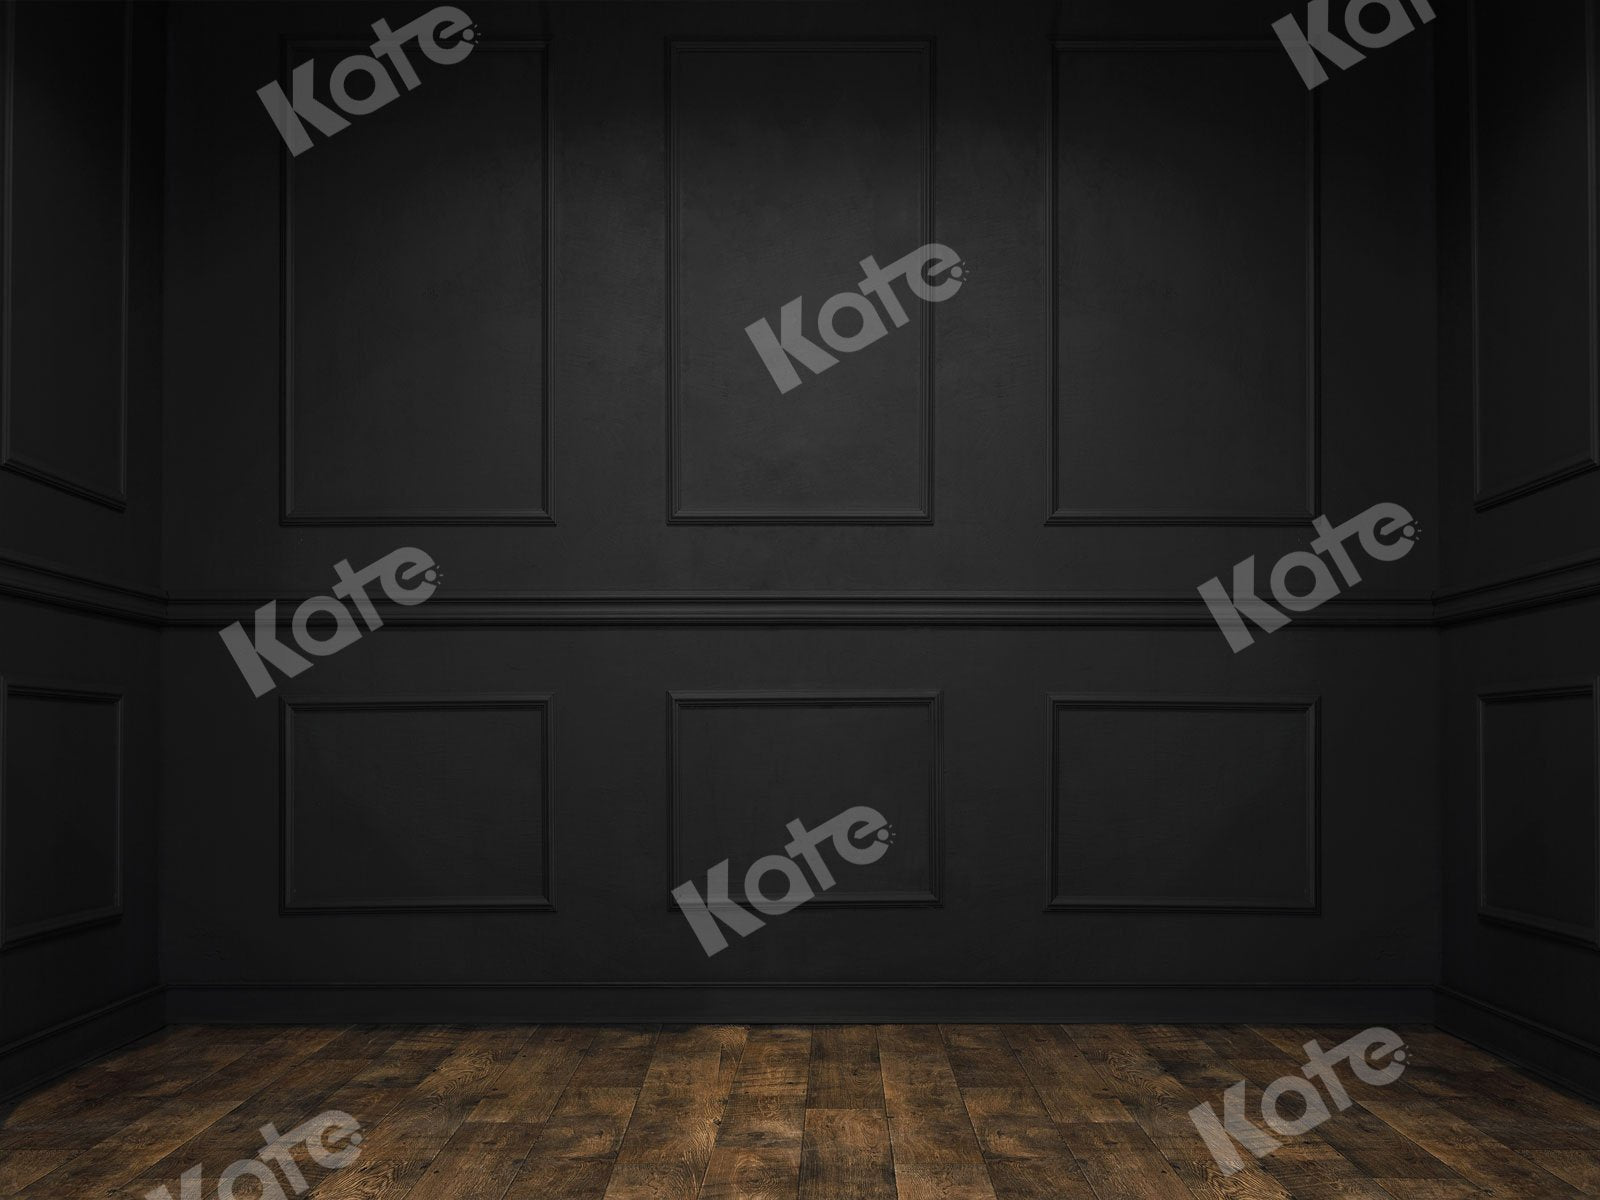 Kate Retro Black Wall Wood Floor Backdrop for Photography